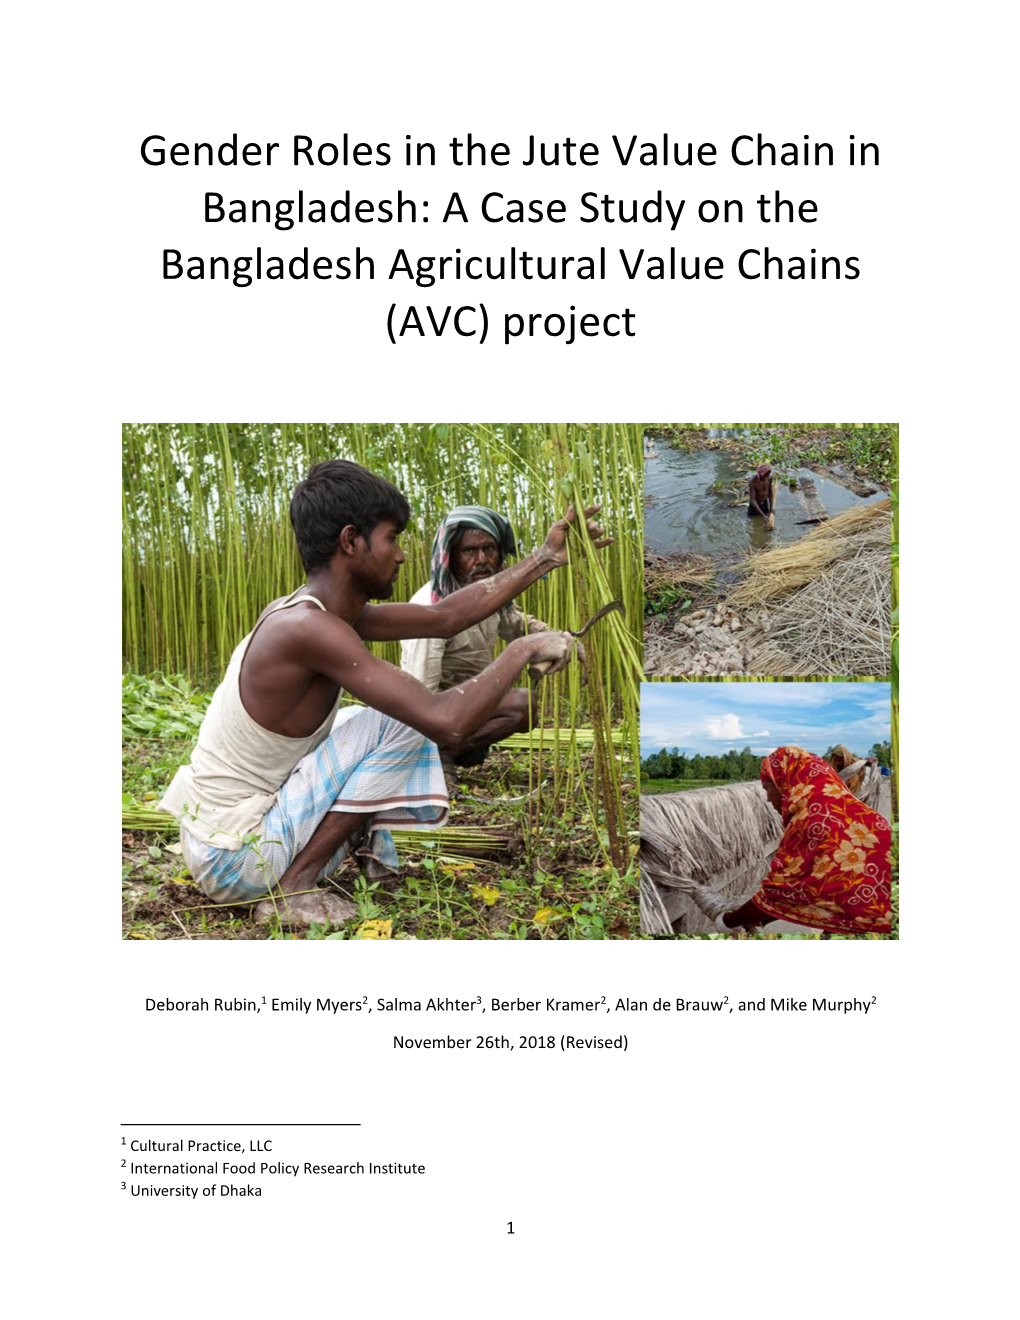 Gender Roles in the Jute Value Chain in Bangladesh: a Case Study on the Bangladesh Agricultural Value Chains (AVC) Project